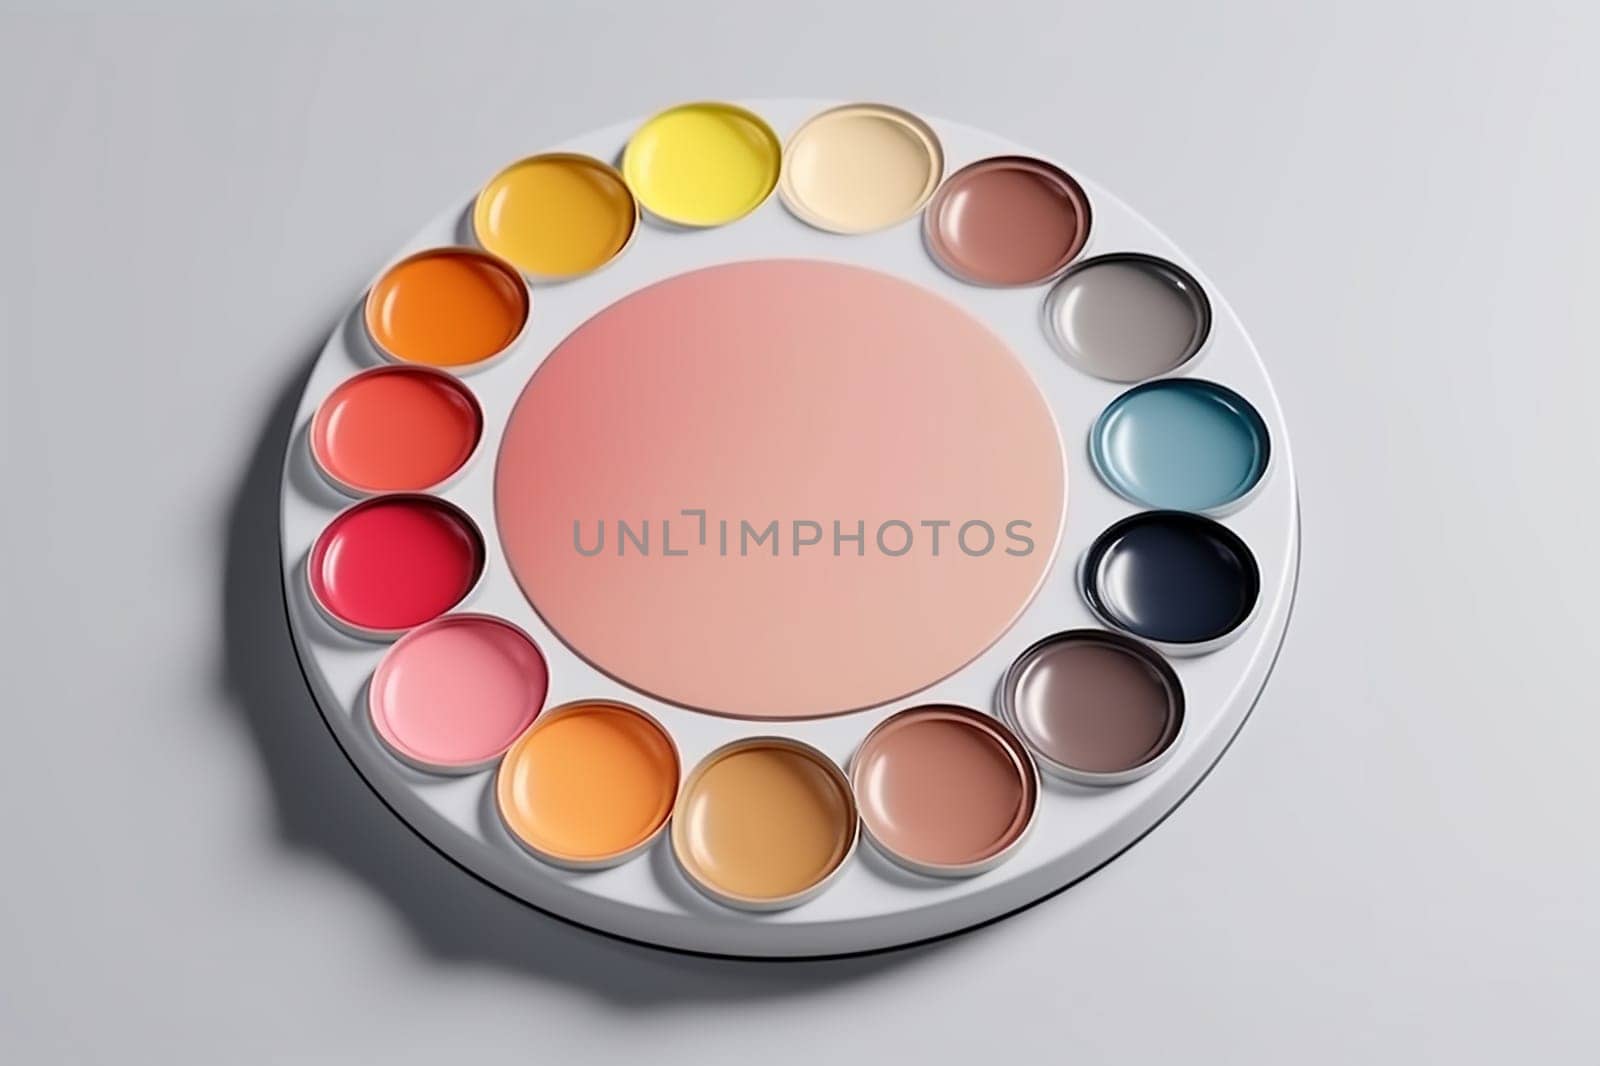 Assorted colorful make up palette against a plain background. by Hype2art